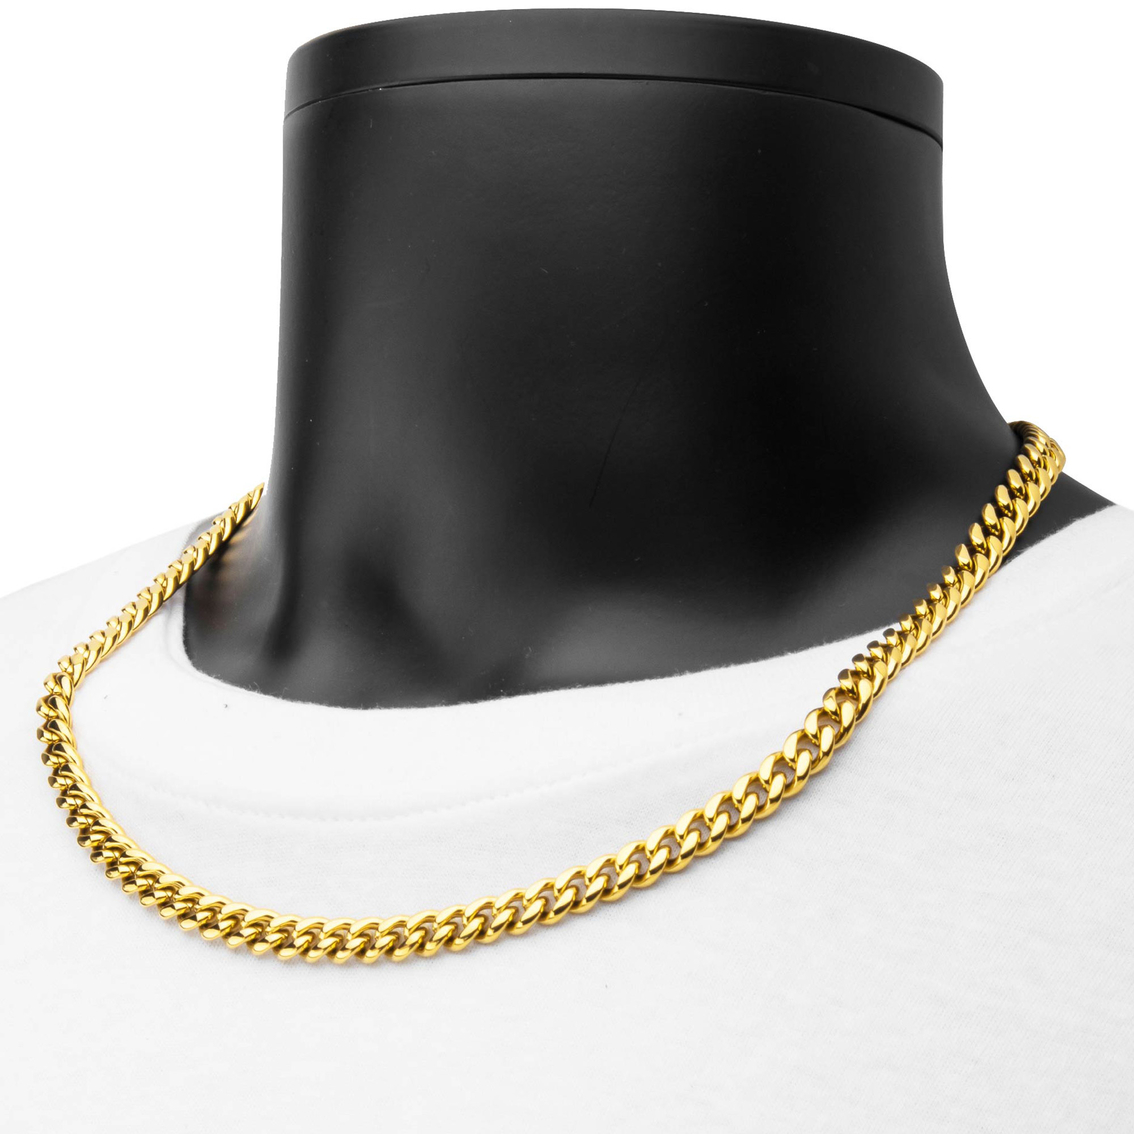 Inox18K Goldtone Miami Cuban Chain Necklace with Cubic Zirconia - Image 4 of 4